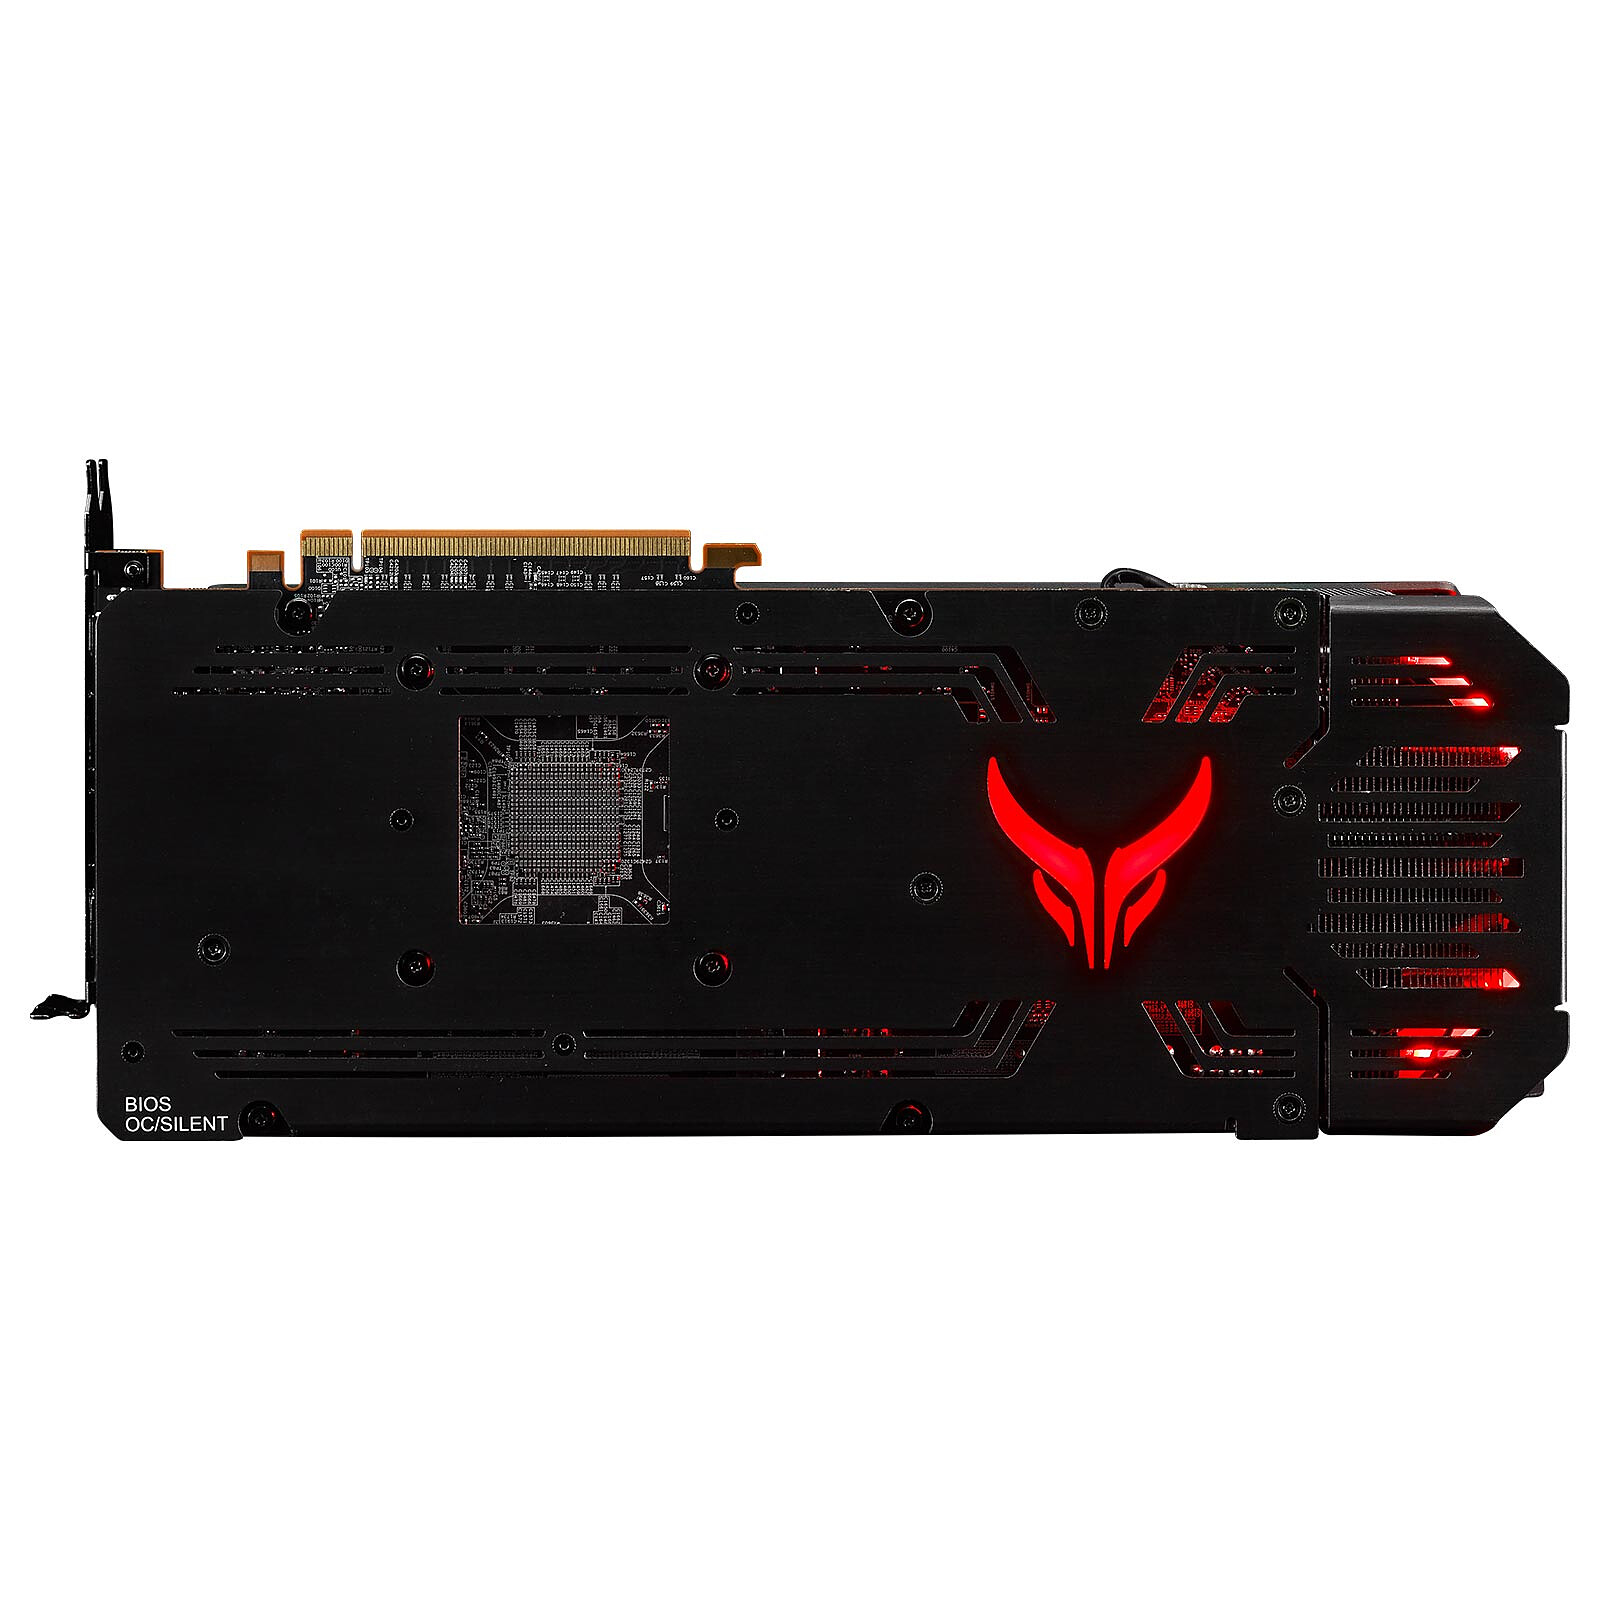 PowerColor Red Devil AMD Radeon RX 6900 XT Ultimate Gaming Graphics Card with 16GB GDDR6 Memory Powered by AMD RDNA 2 HDMI 2.1